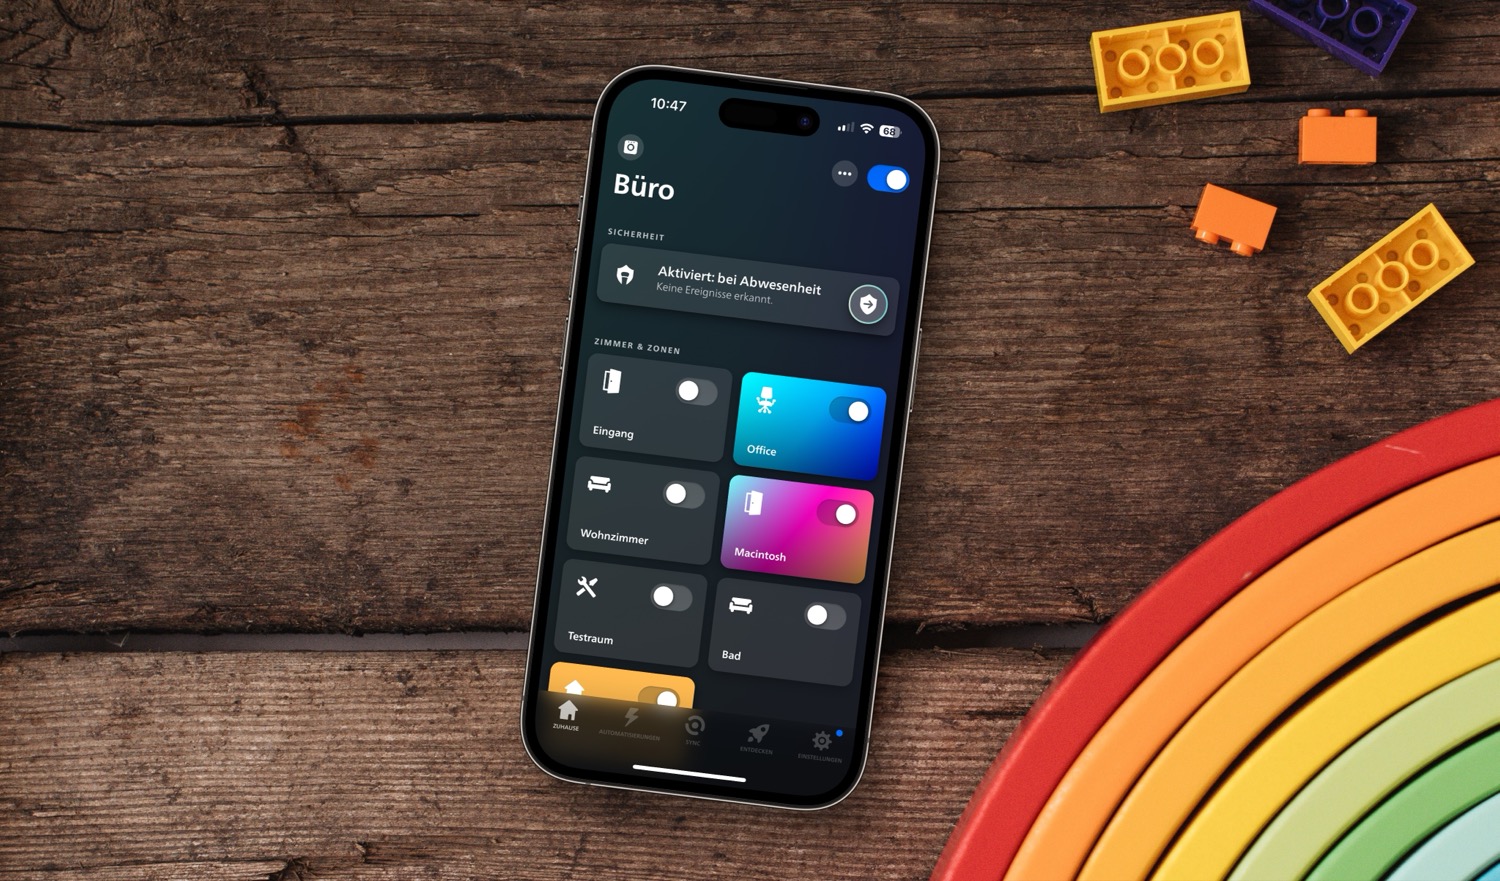 Hueblog: This is the new compact view in the Philips Hue app